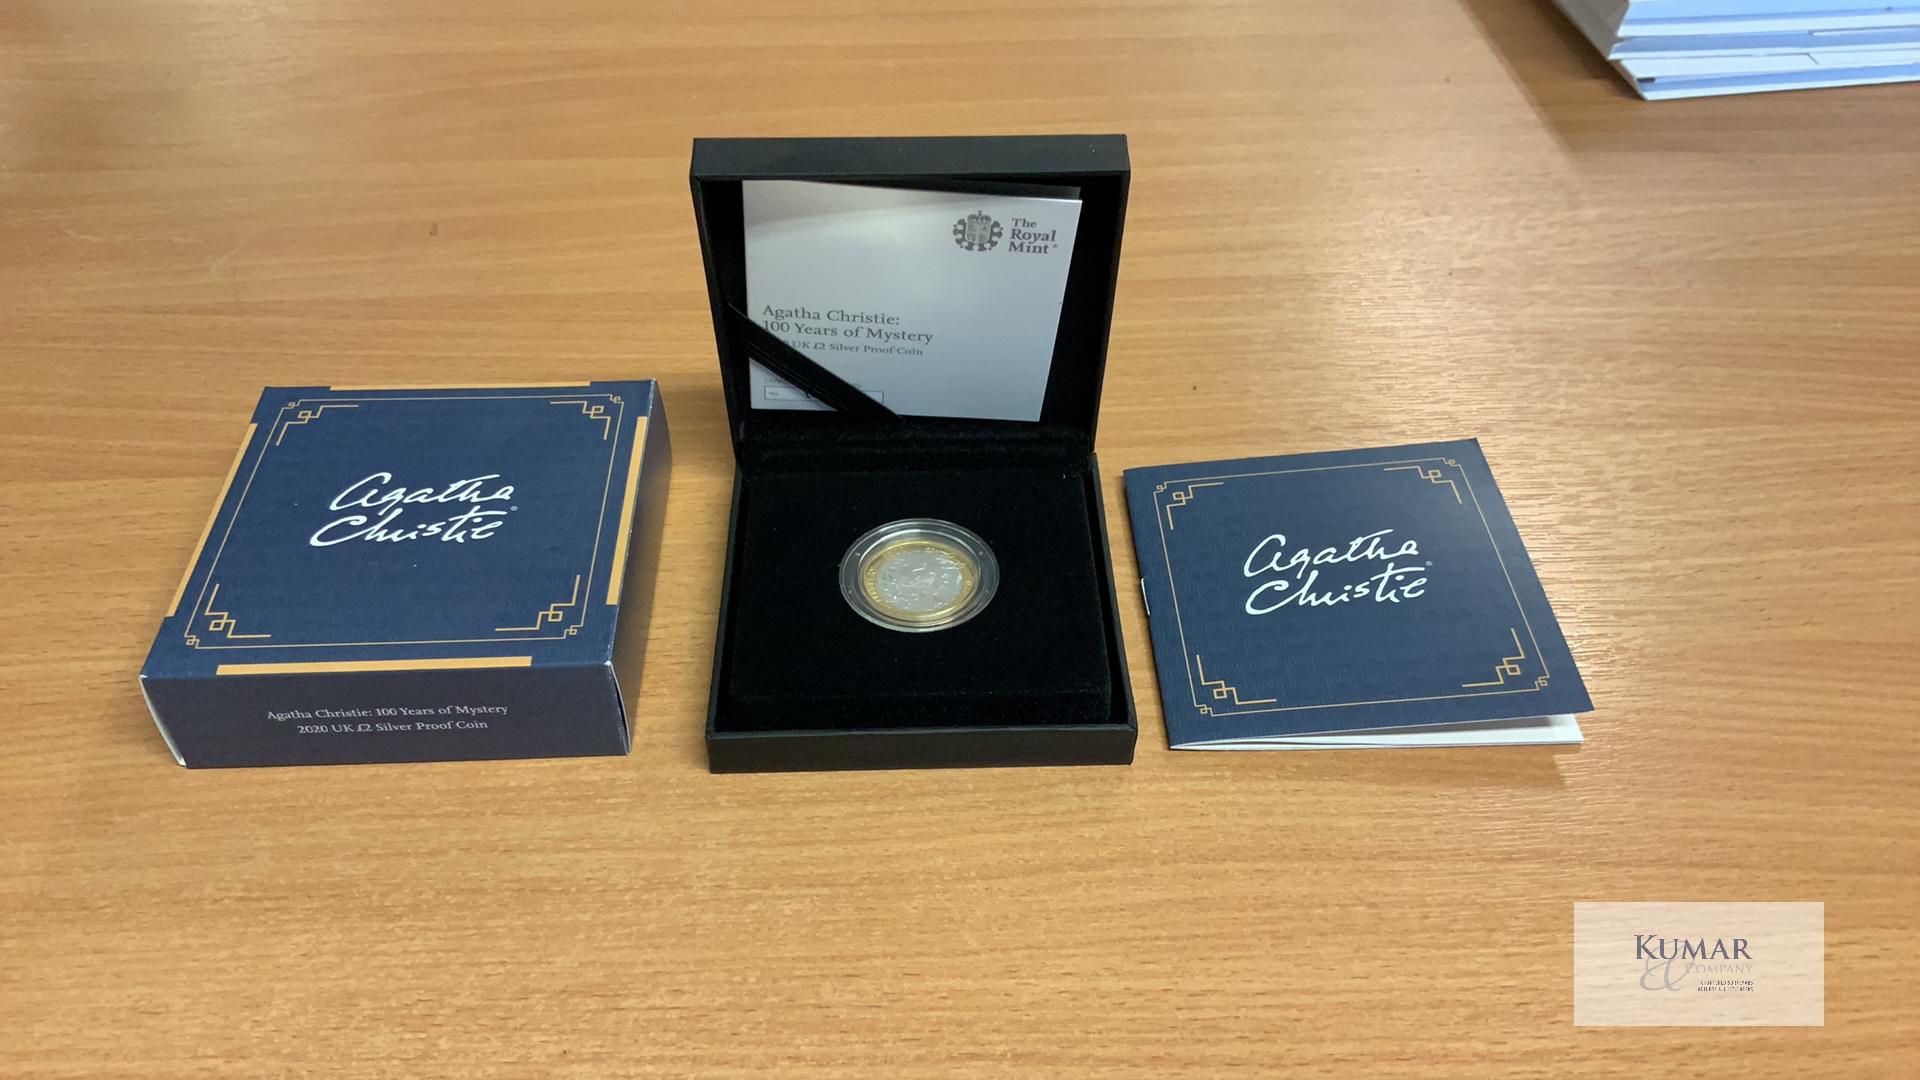 The Royal Mint Coin- Agatha Christie 100 years of Mystery 2020 UK £2 Silver Proof Coin - Image 2 of 4